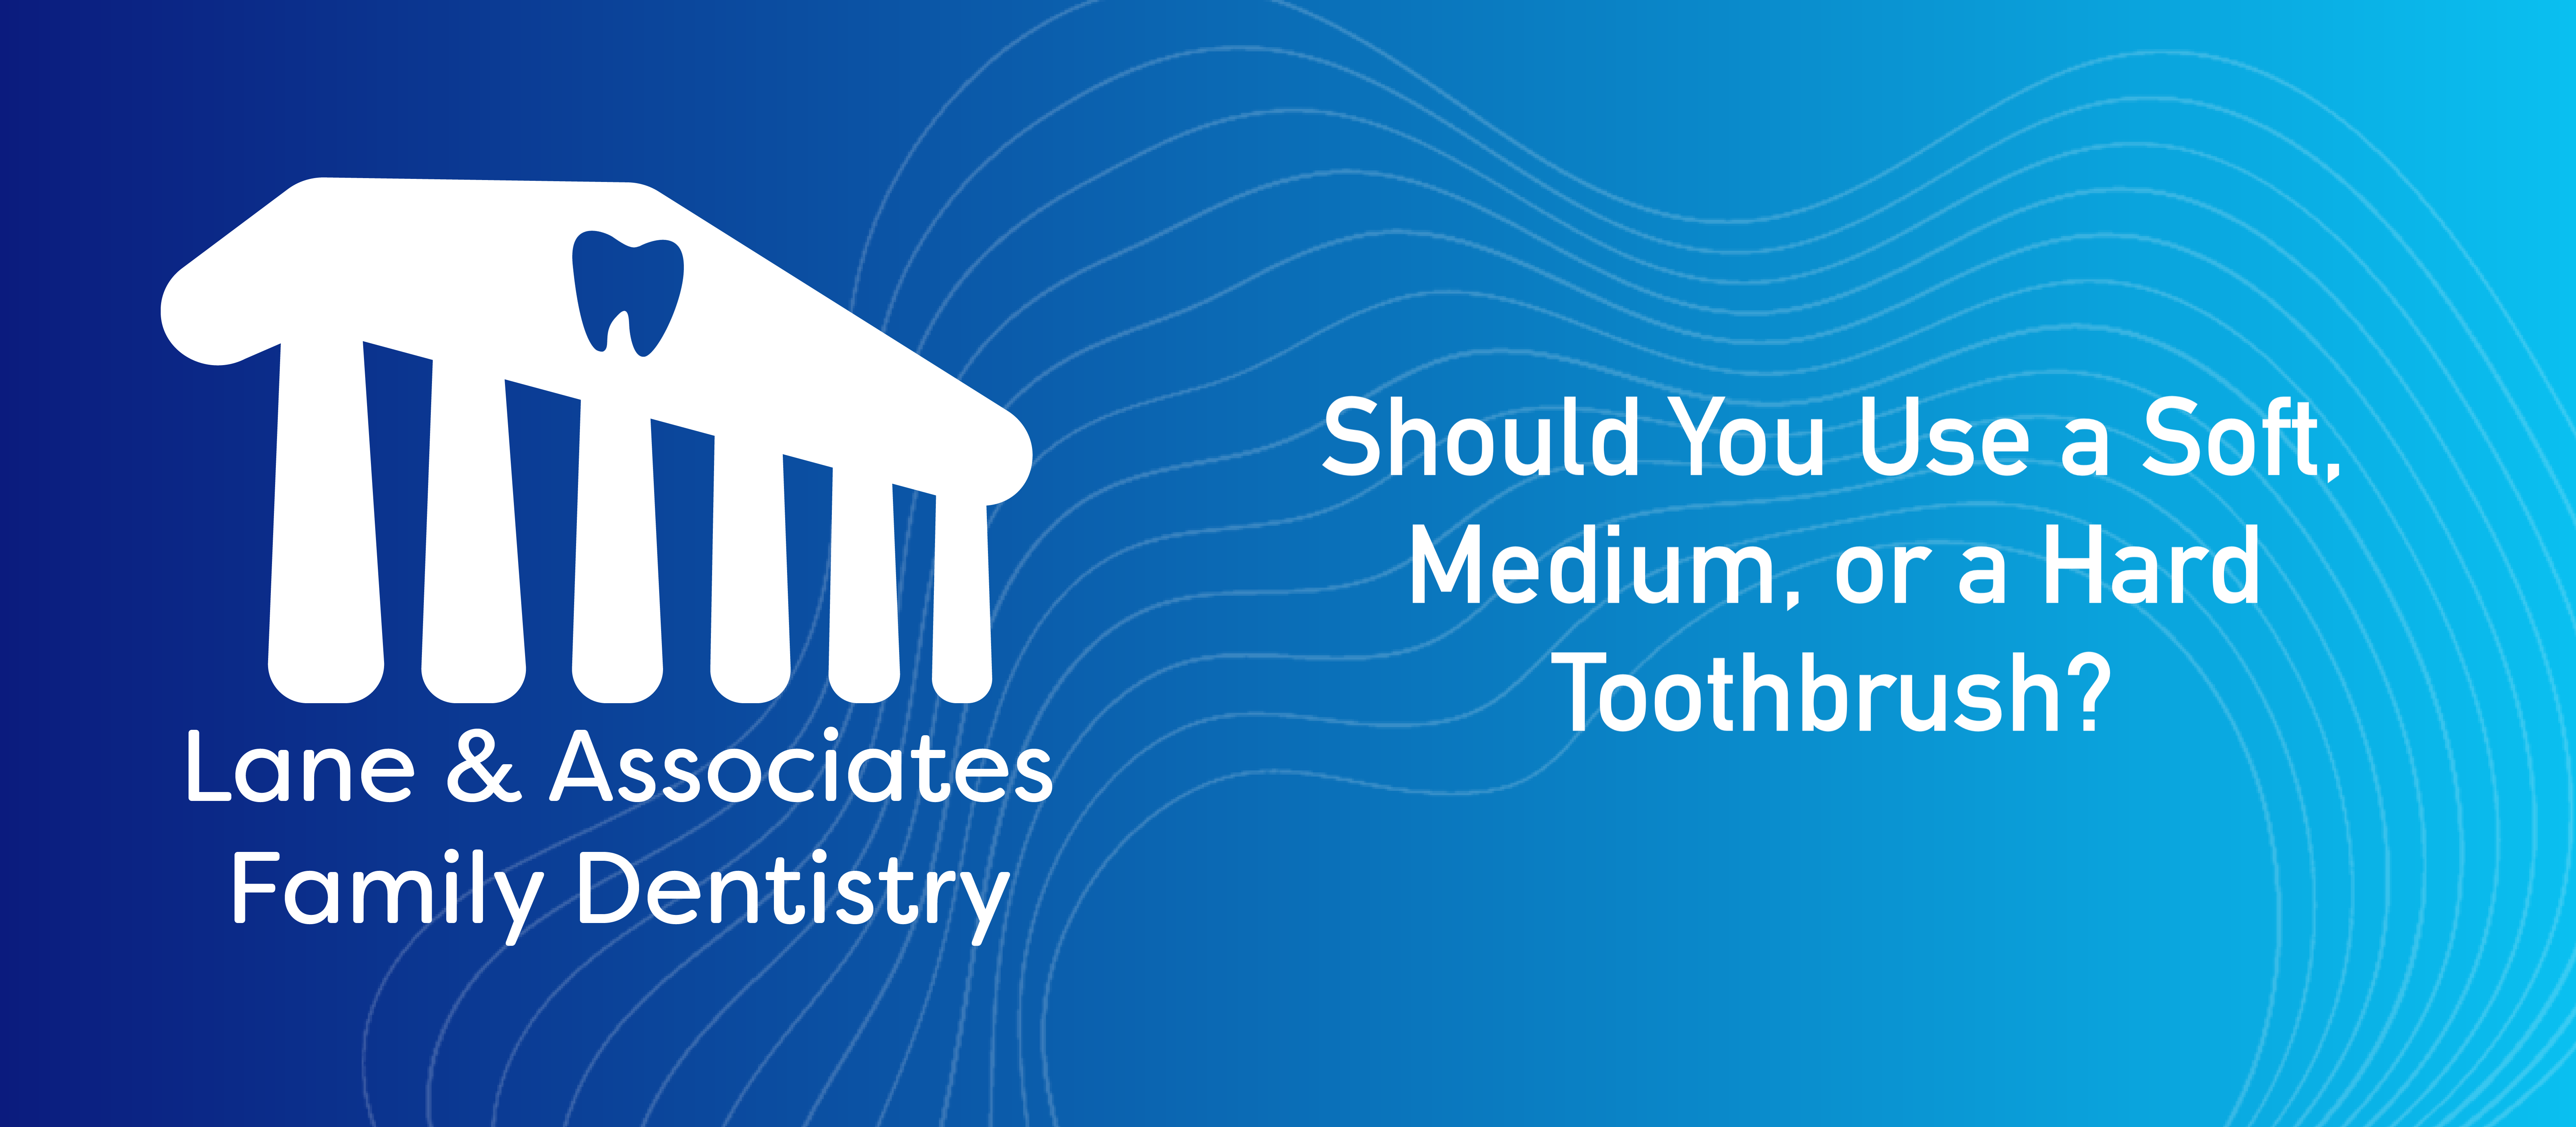 Should you use a soft medium or hard toothbrush?